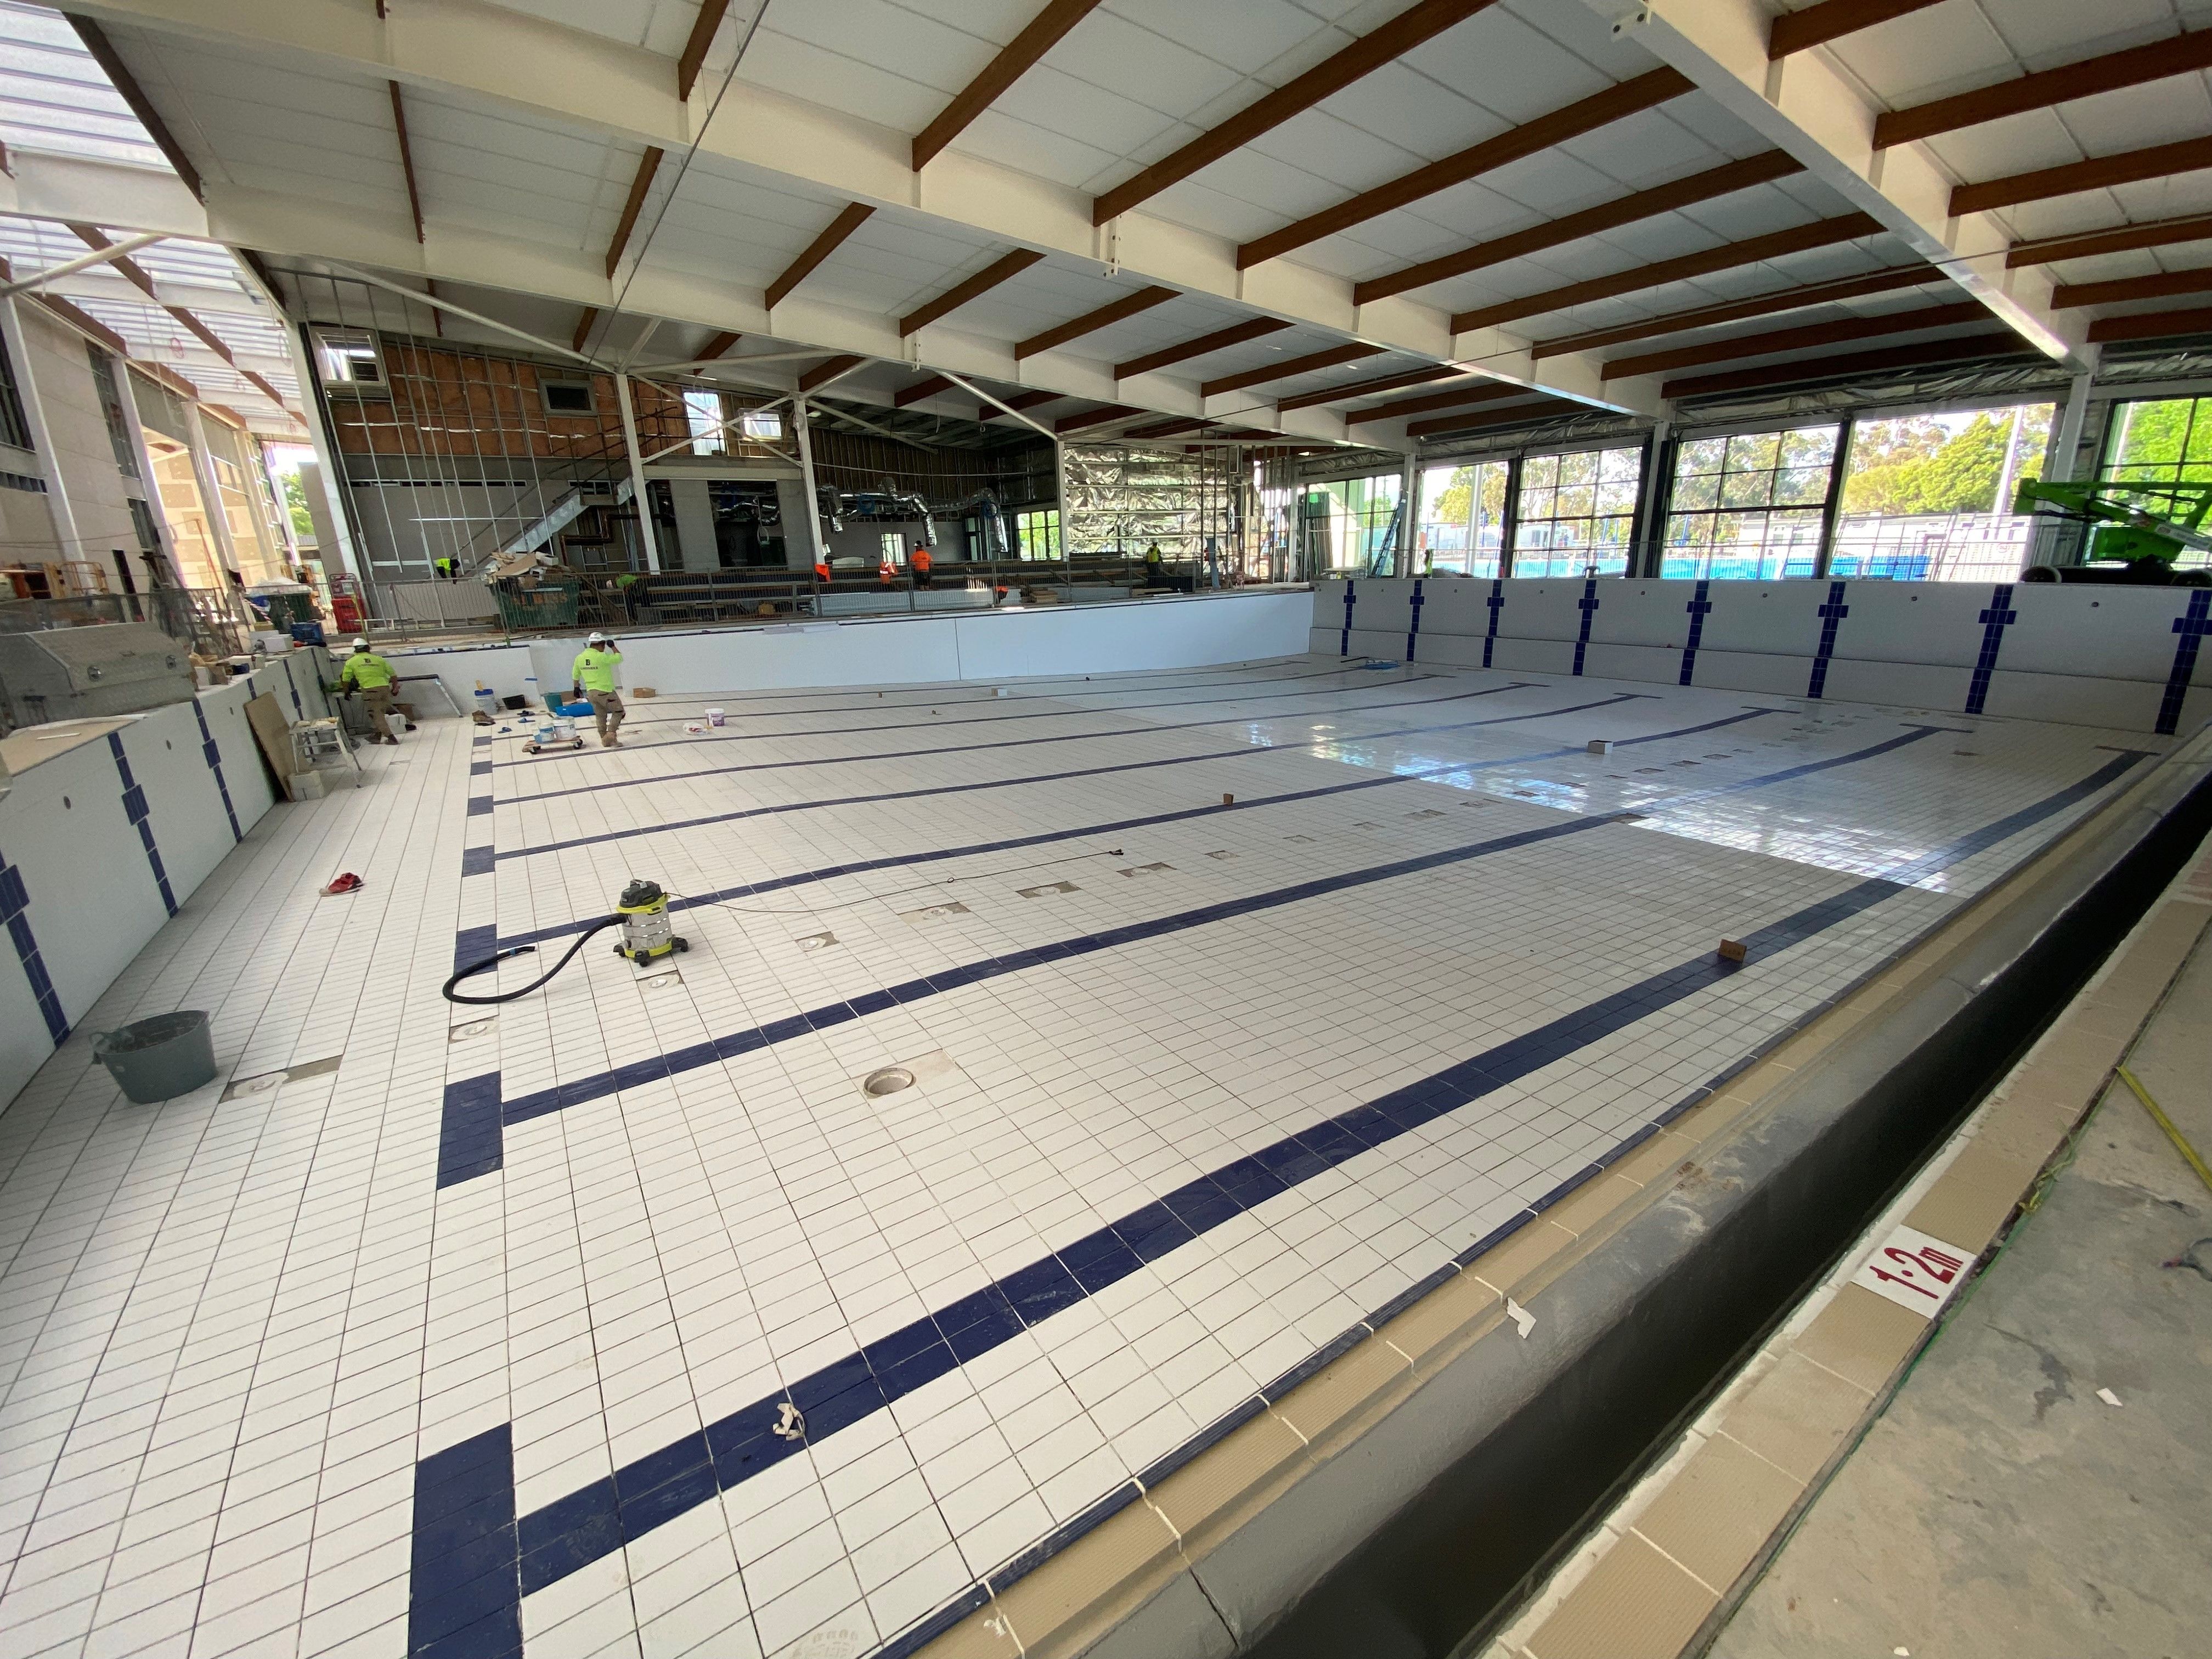 Swim club welcomes news of Goulburn Aquatic and Leisure Centre's March opening